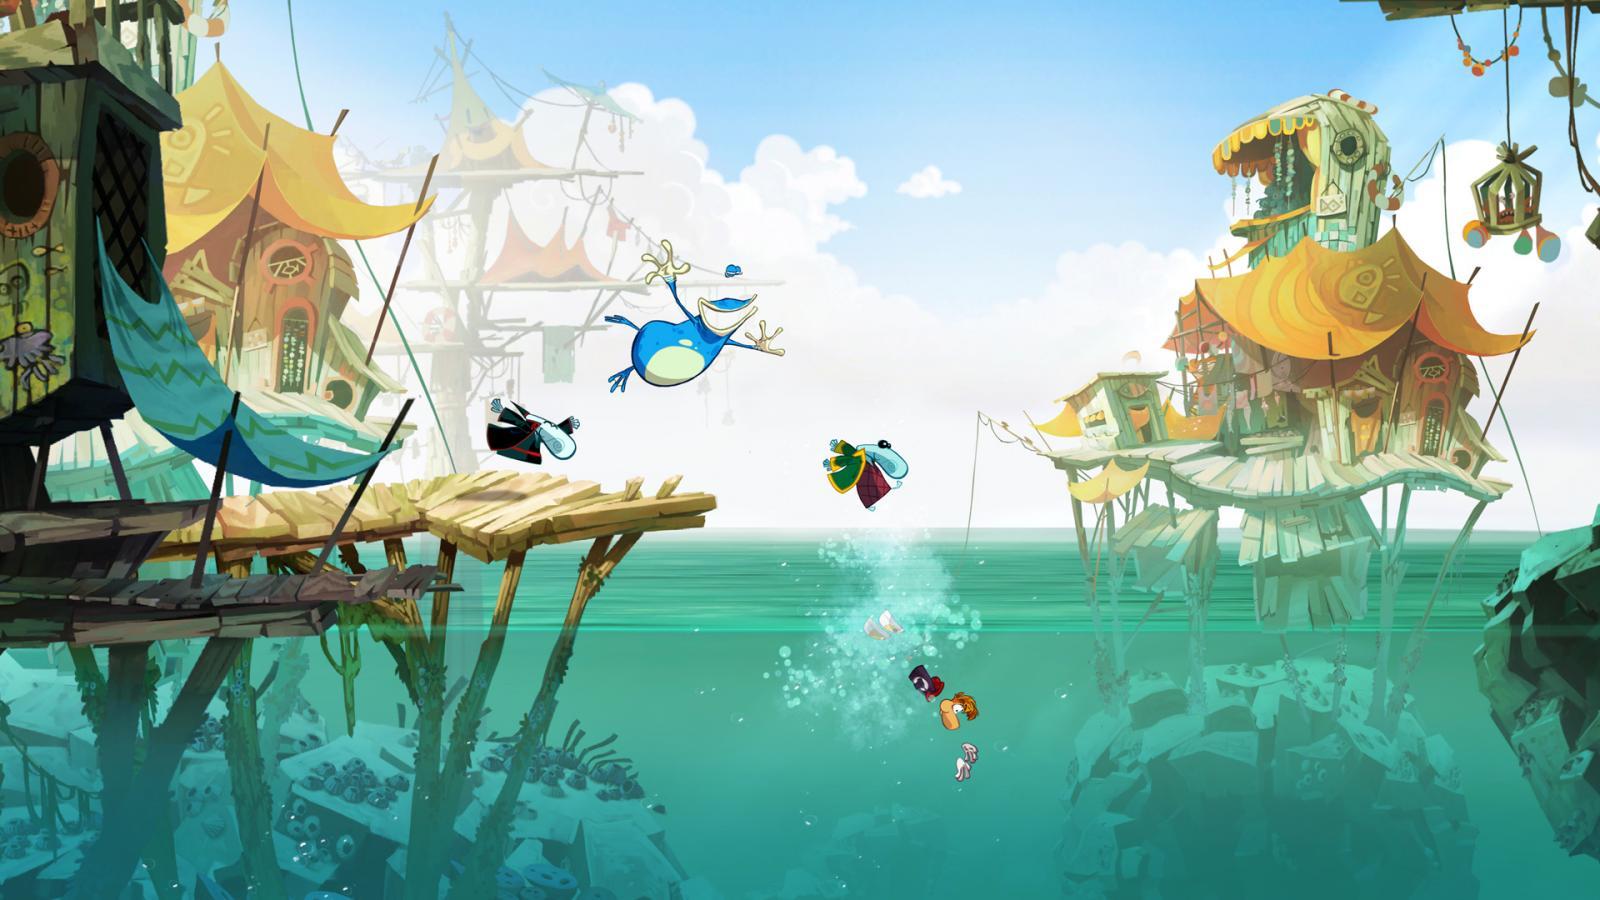 How would you feel if Rayman Legends was ported to iOS/Android (I